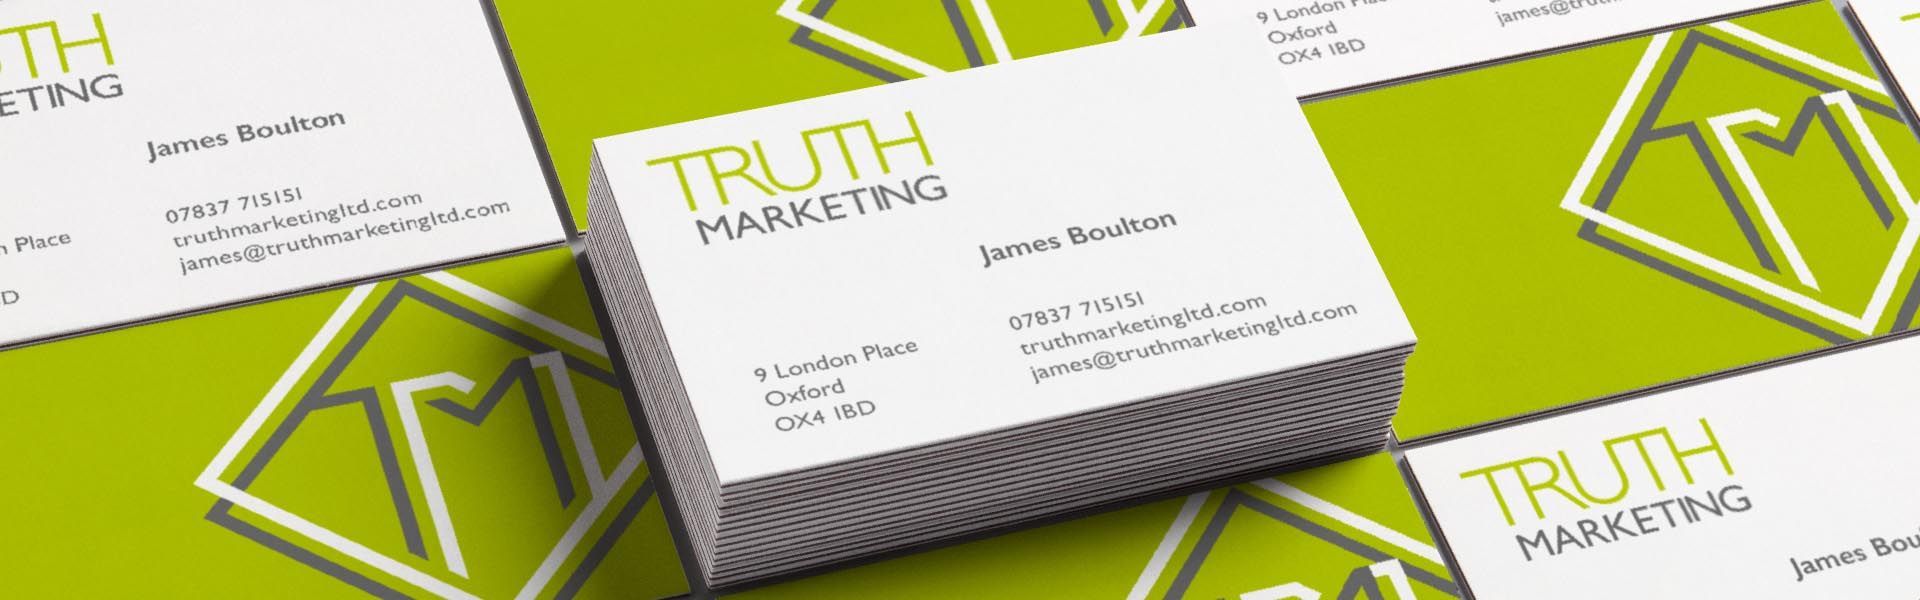 a stack of business cards for truth marketing